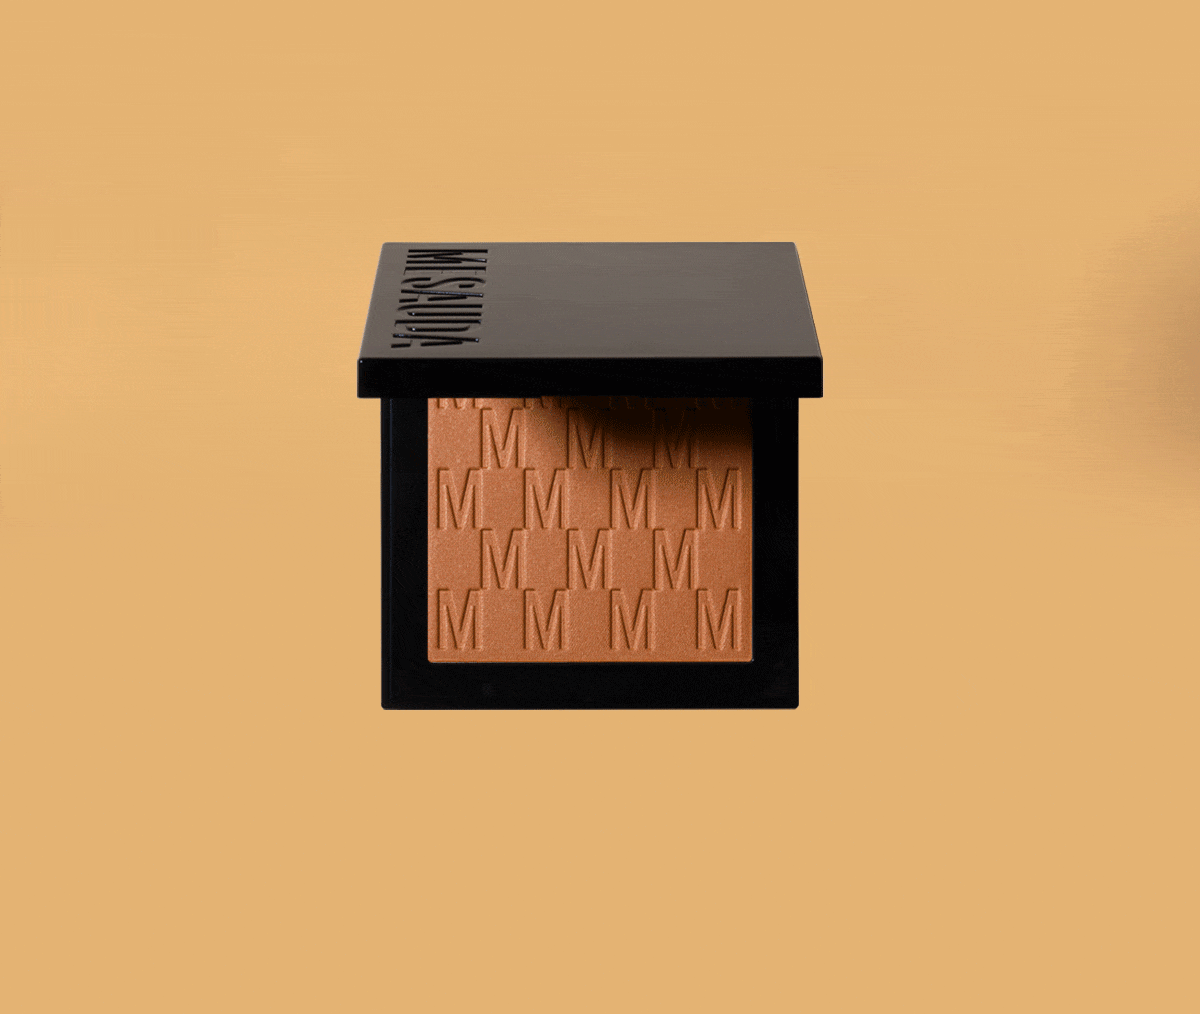 Bronzer: The perfect tan, without sunshine